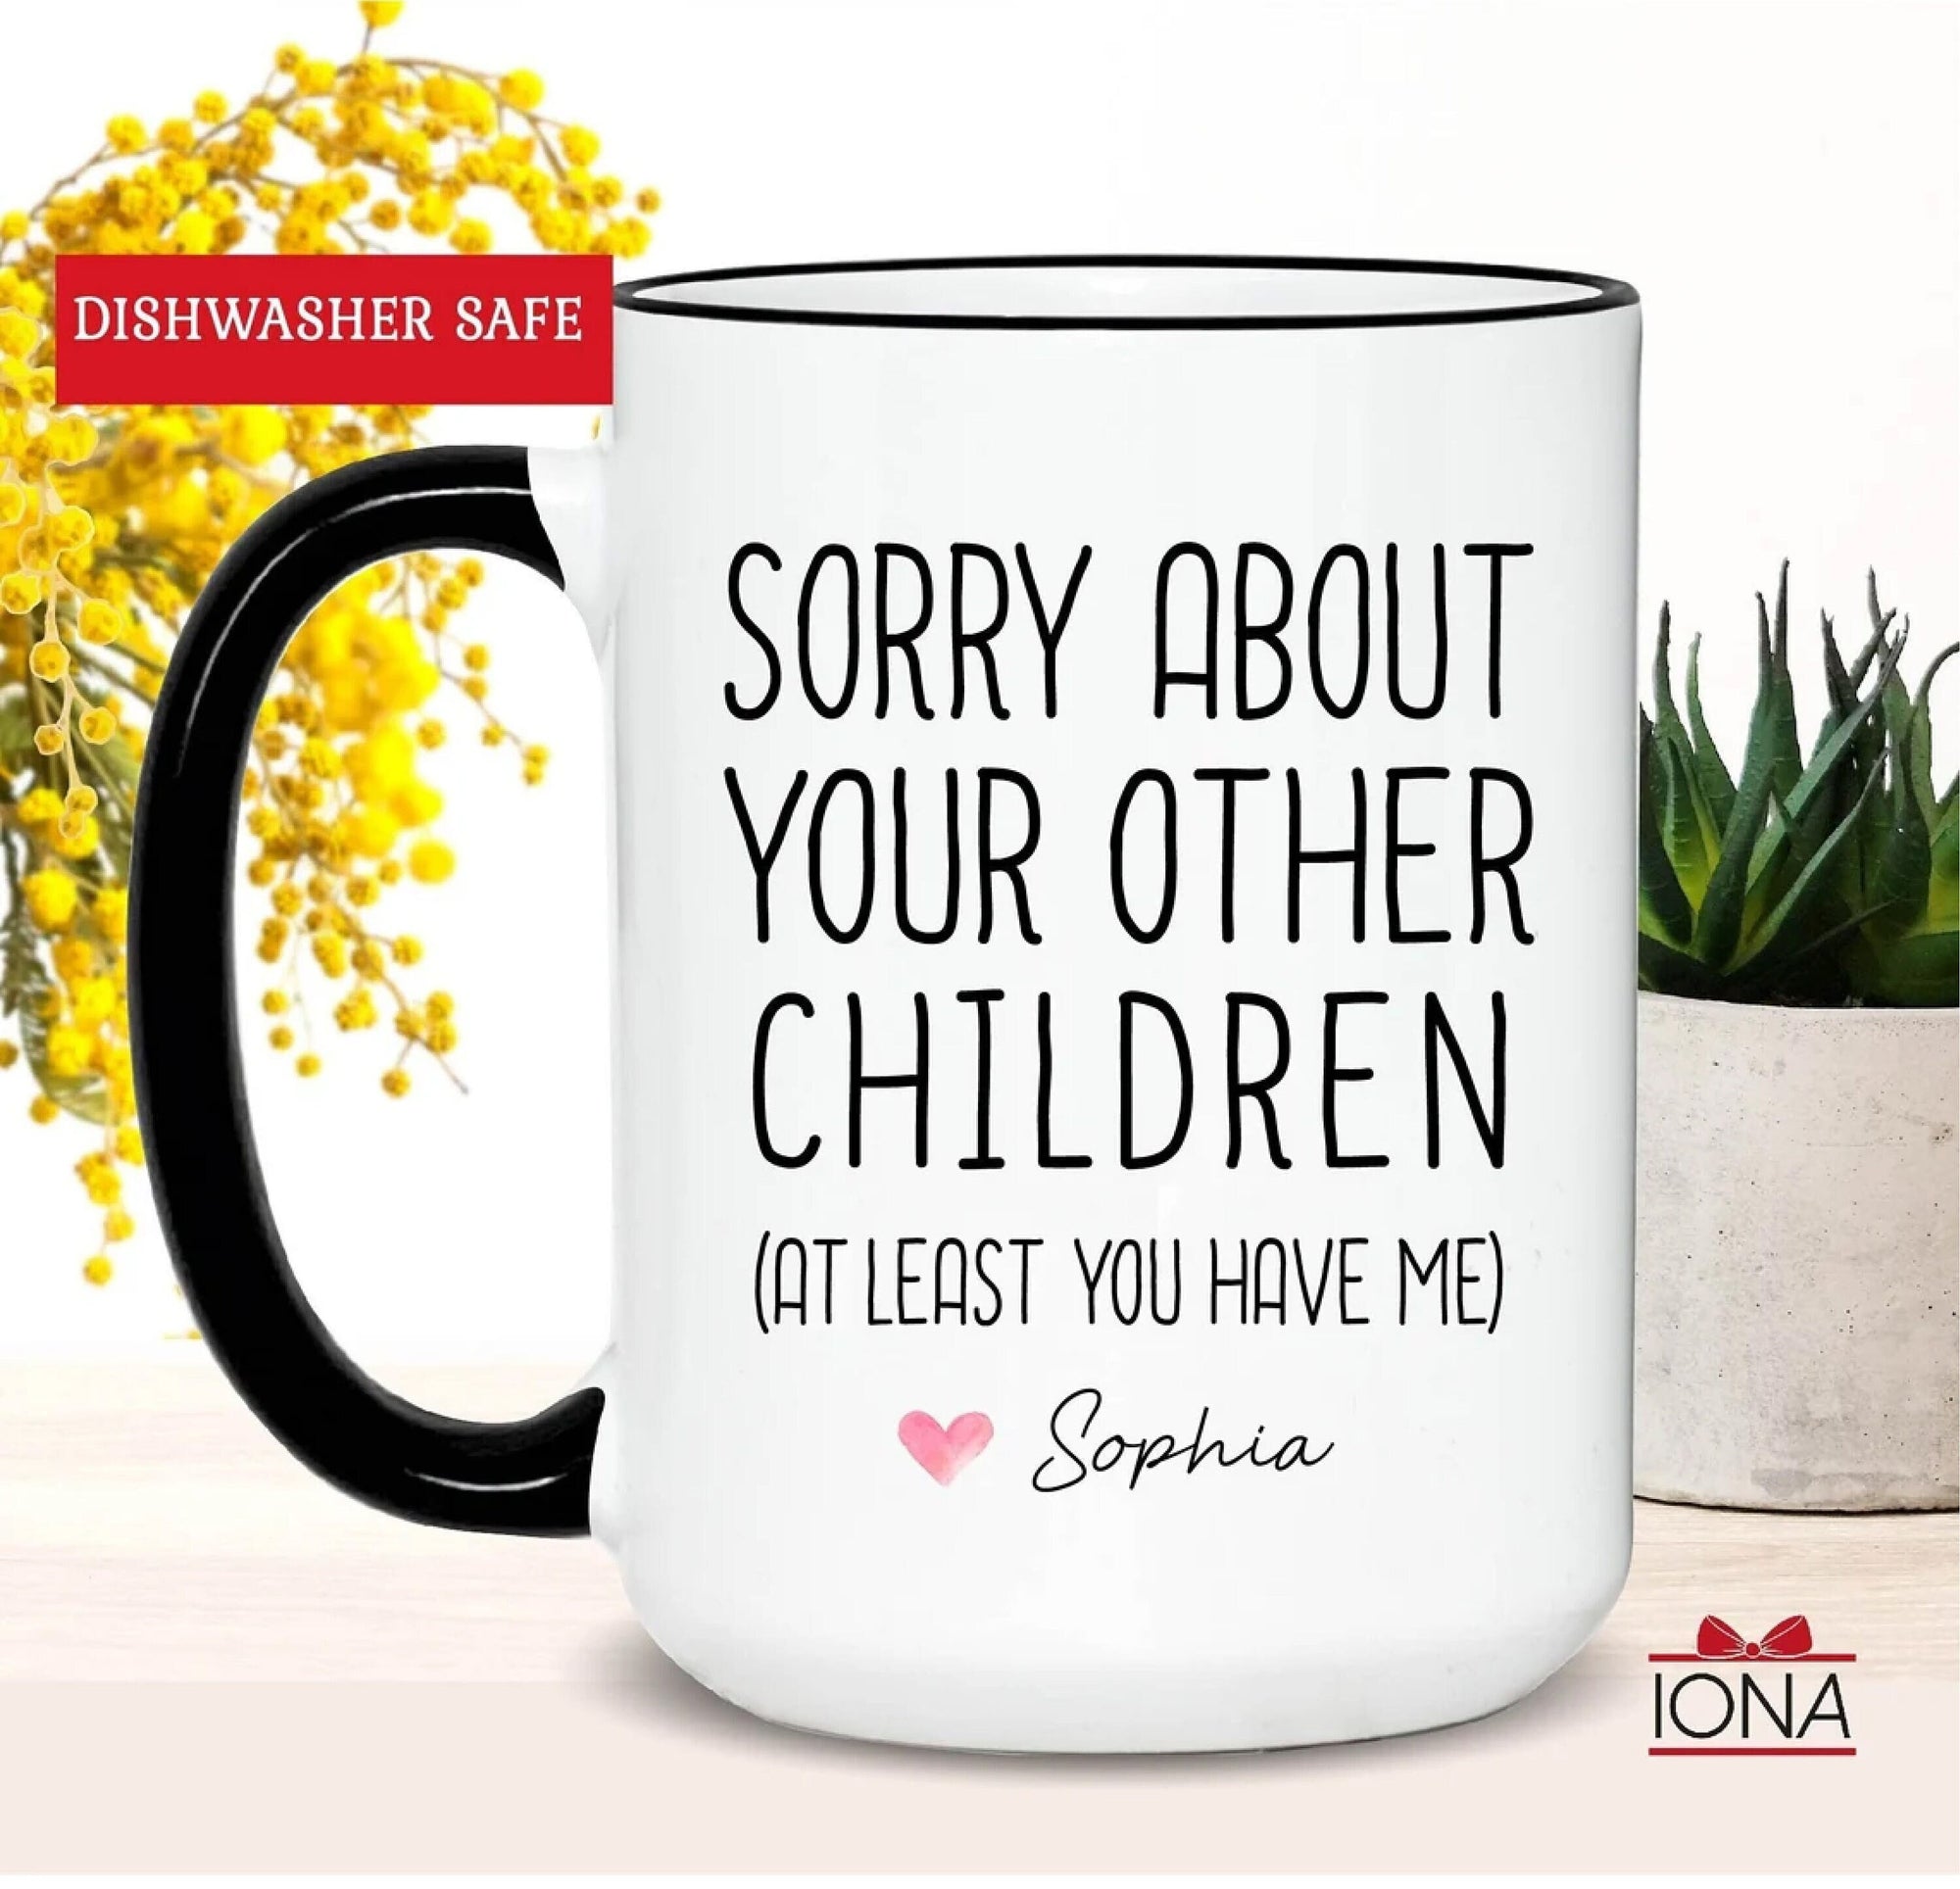 Personalized Funny Mom Coffee Mug Sorry About Your Other Children Tea Cup, Custom Mother's Day Gift, Mom Birthday Gift from Daughter, Son